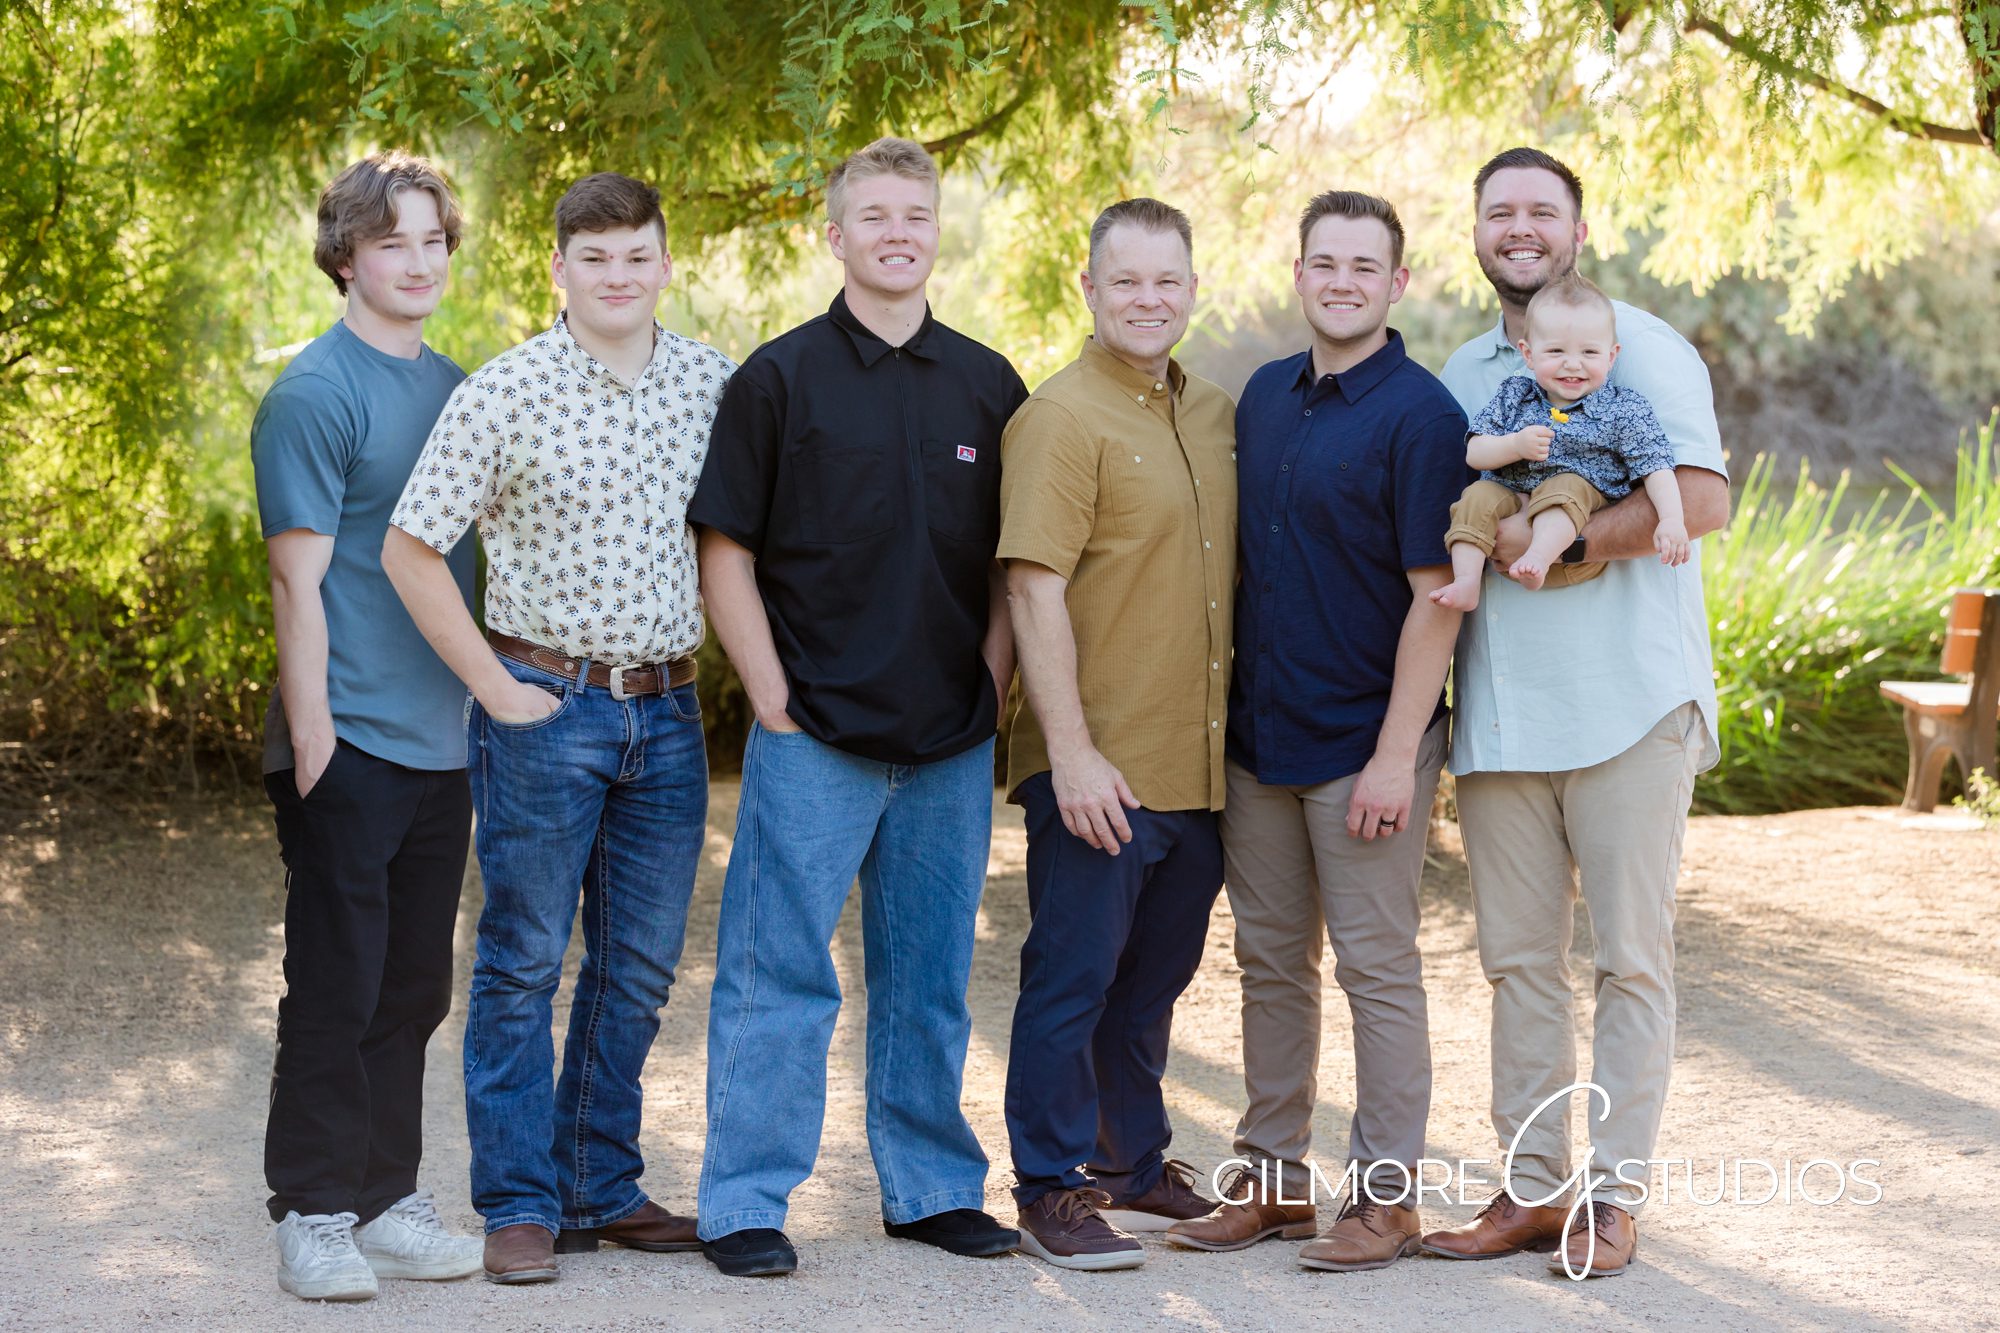 Family Reunion Photographer - Gilbert AZ - extended family, spring clothes, bright, riperian reserve, lakes, floral dress, lime green dress, khaki, spring colors, large family, reunion, family portrait with older siblings, teenagers, family photos with teens, queen creek, chandler, mesa, scottsdale, san tan, park, outdoor photo shoot locations in arizona, shaded photo locations, grandparents with grandbaby, updated headshot, gilmore studios, sisters, brothers, pose, posed, family posing, family portraits, family photography outfit ideas, 